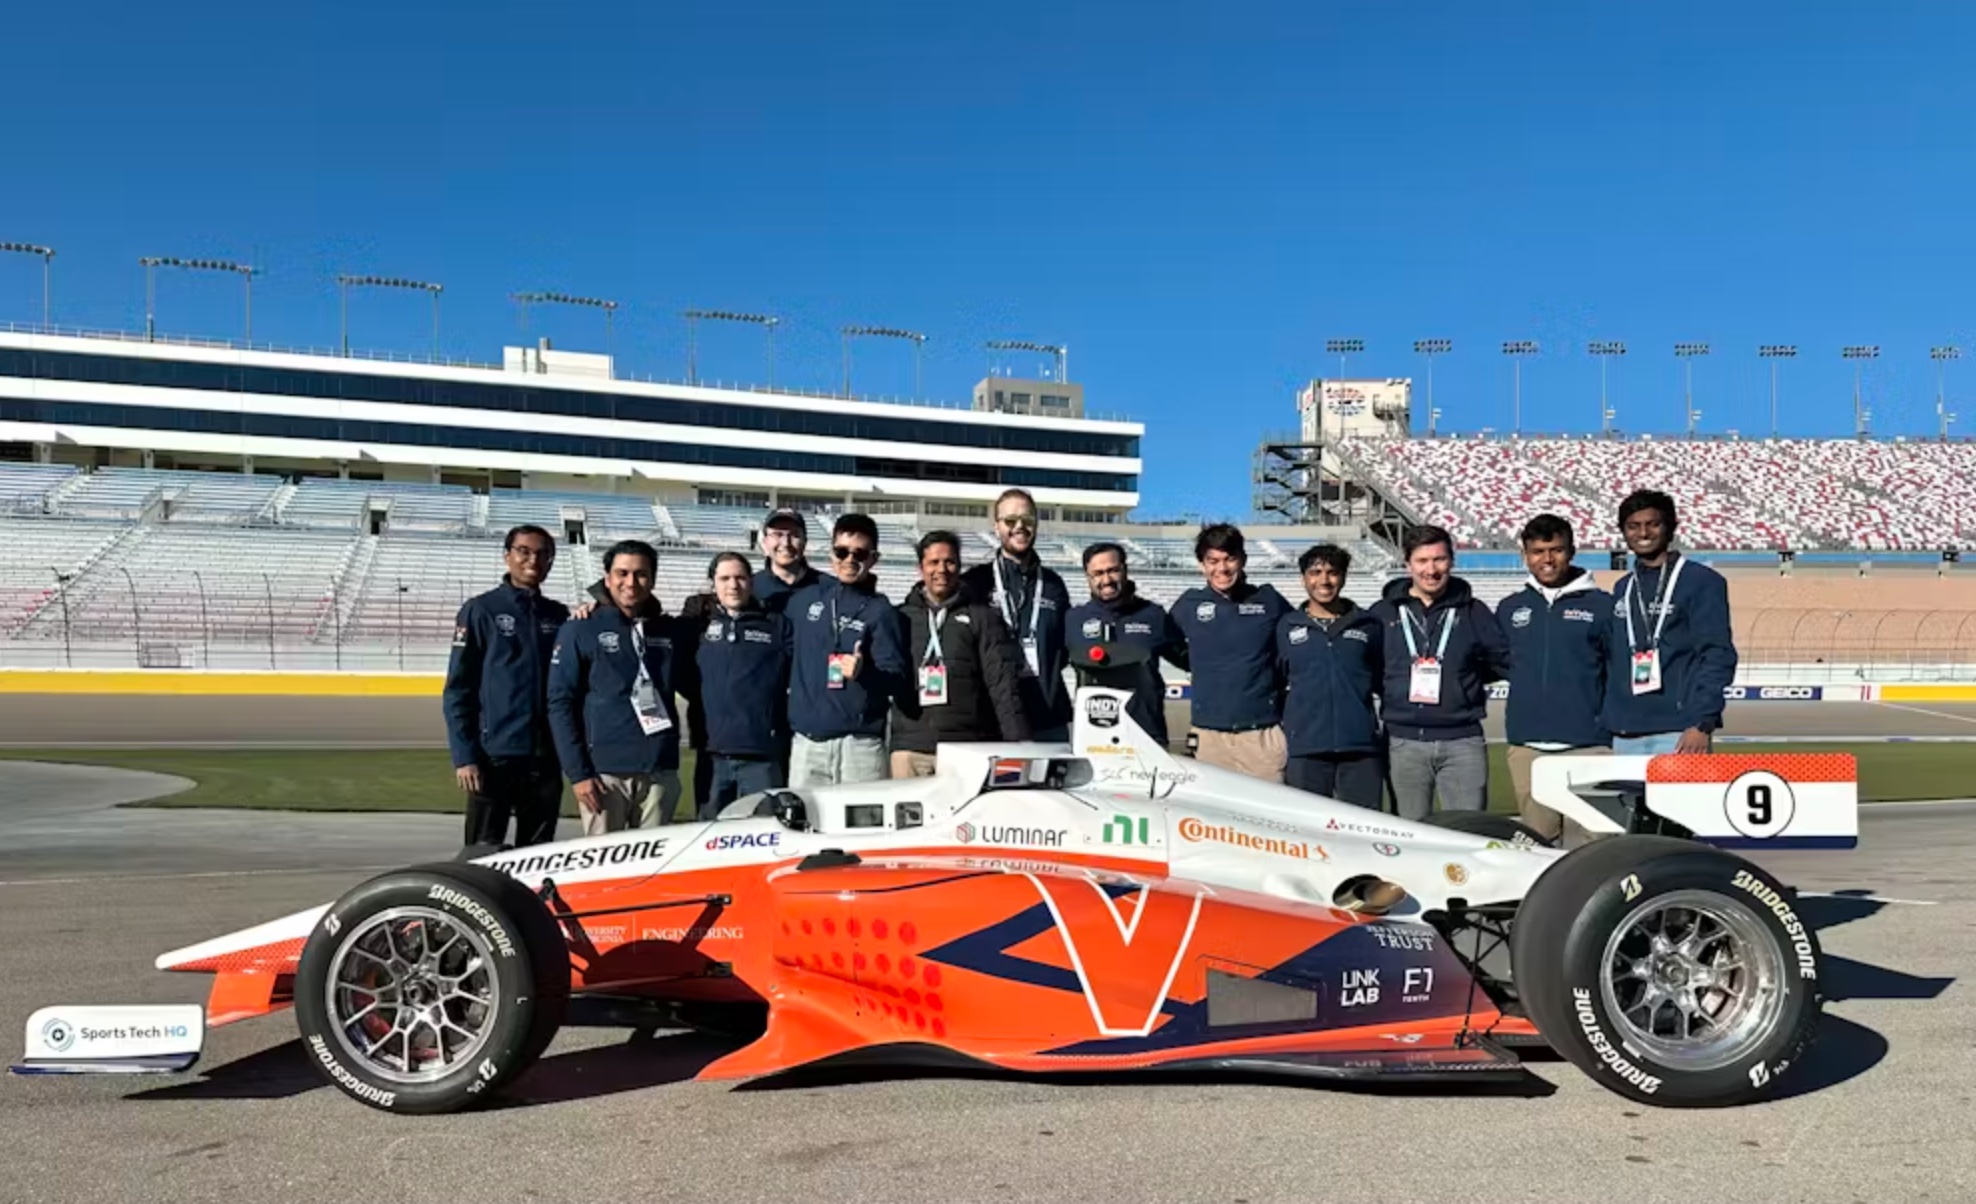 A team of individuals posing with a formula-style racing car on a racetrack.